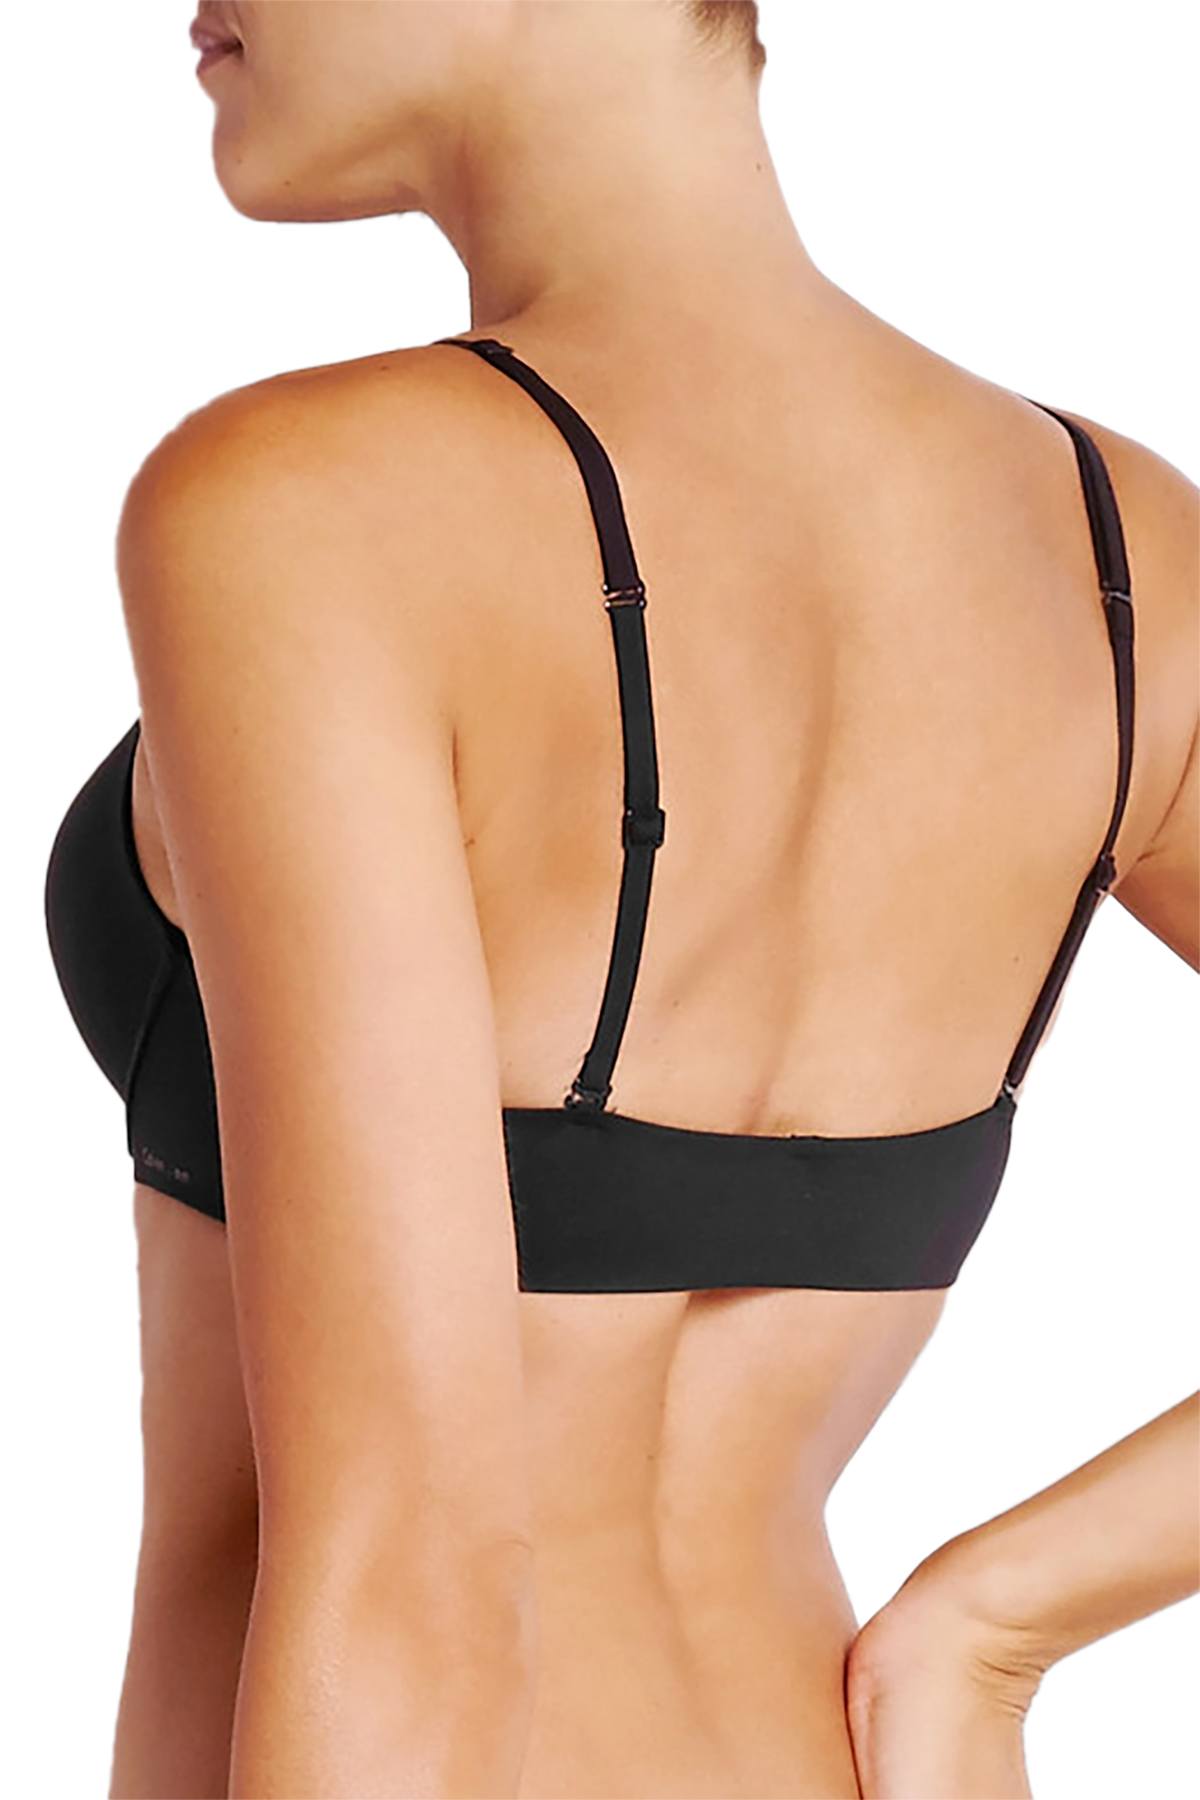 https://www.cheapundies.com/cdn/shop/products/Calvin-Klein-Black-Perfectly-Fit-Multi-Way-Push-Up-Bra_94226_84d81182-e2b3-4a0c-a4a3-b12247e4e673.jpg?v=1599845418&width=1200